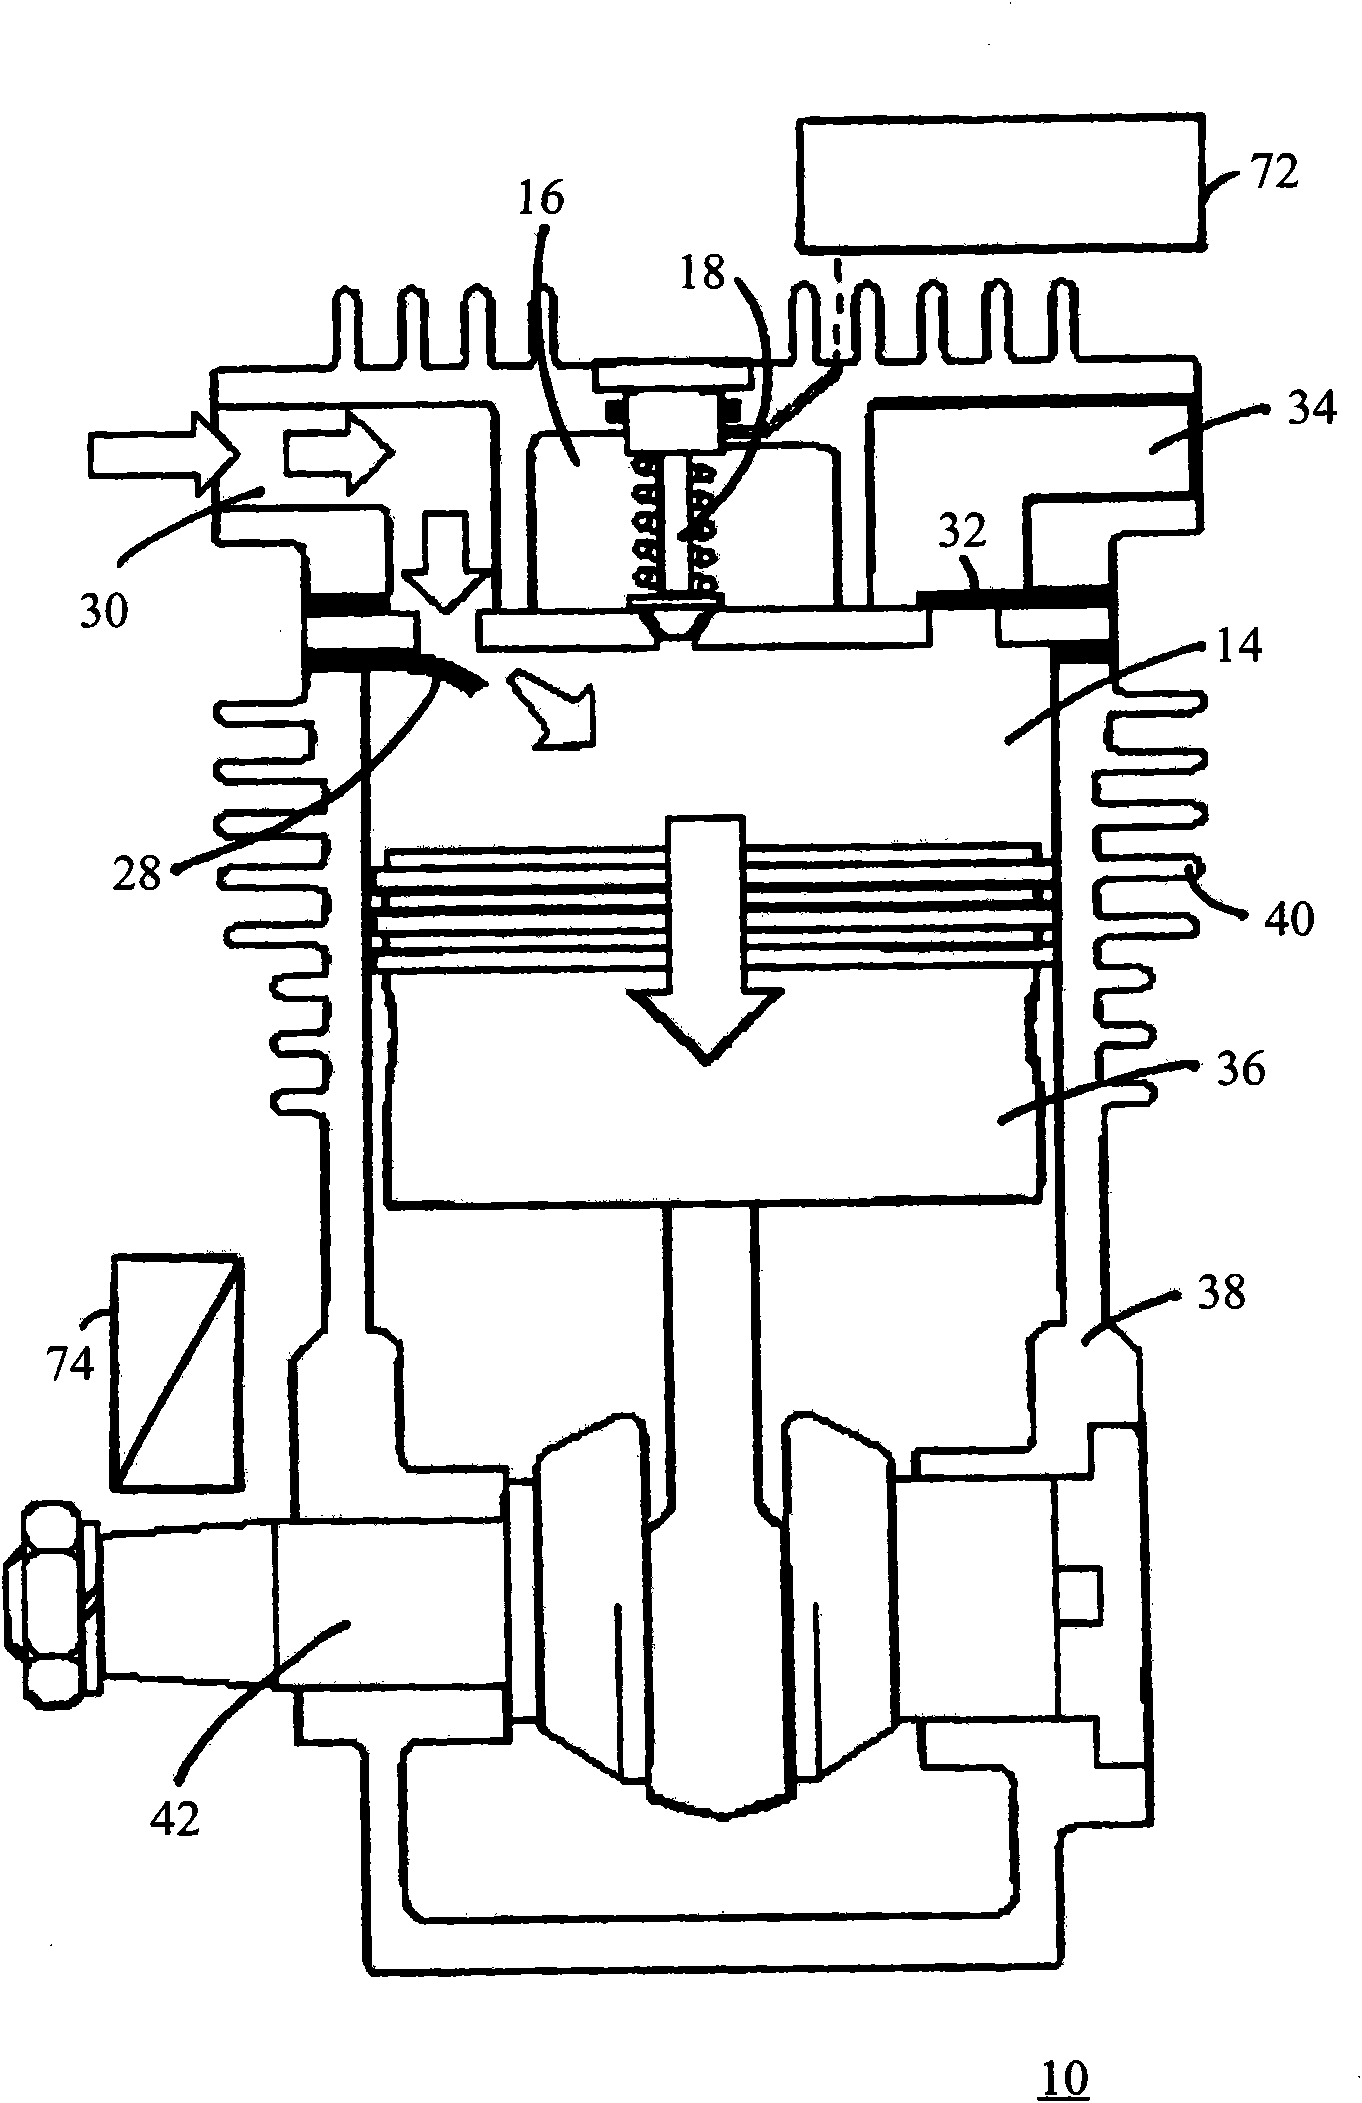 Compressor and method for controlling a compressor for supplying compressed air to a utility vehicle